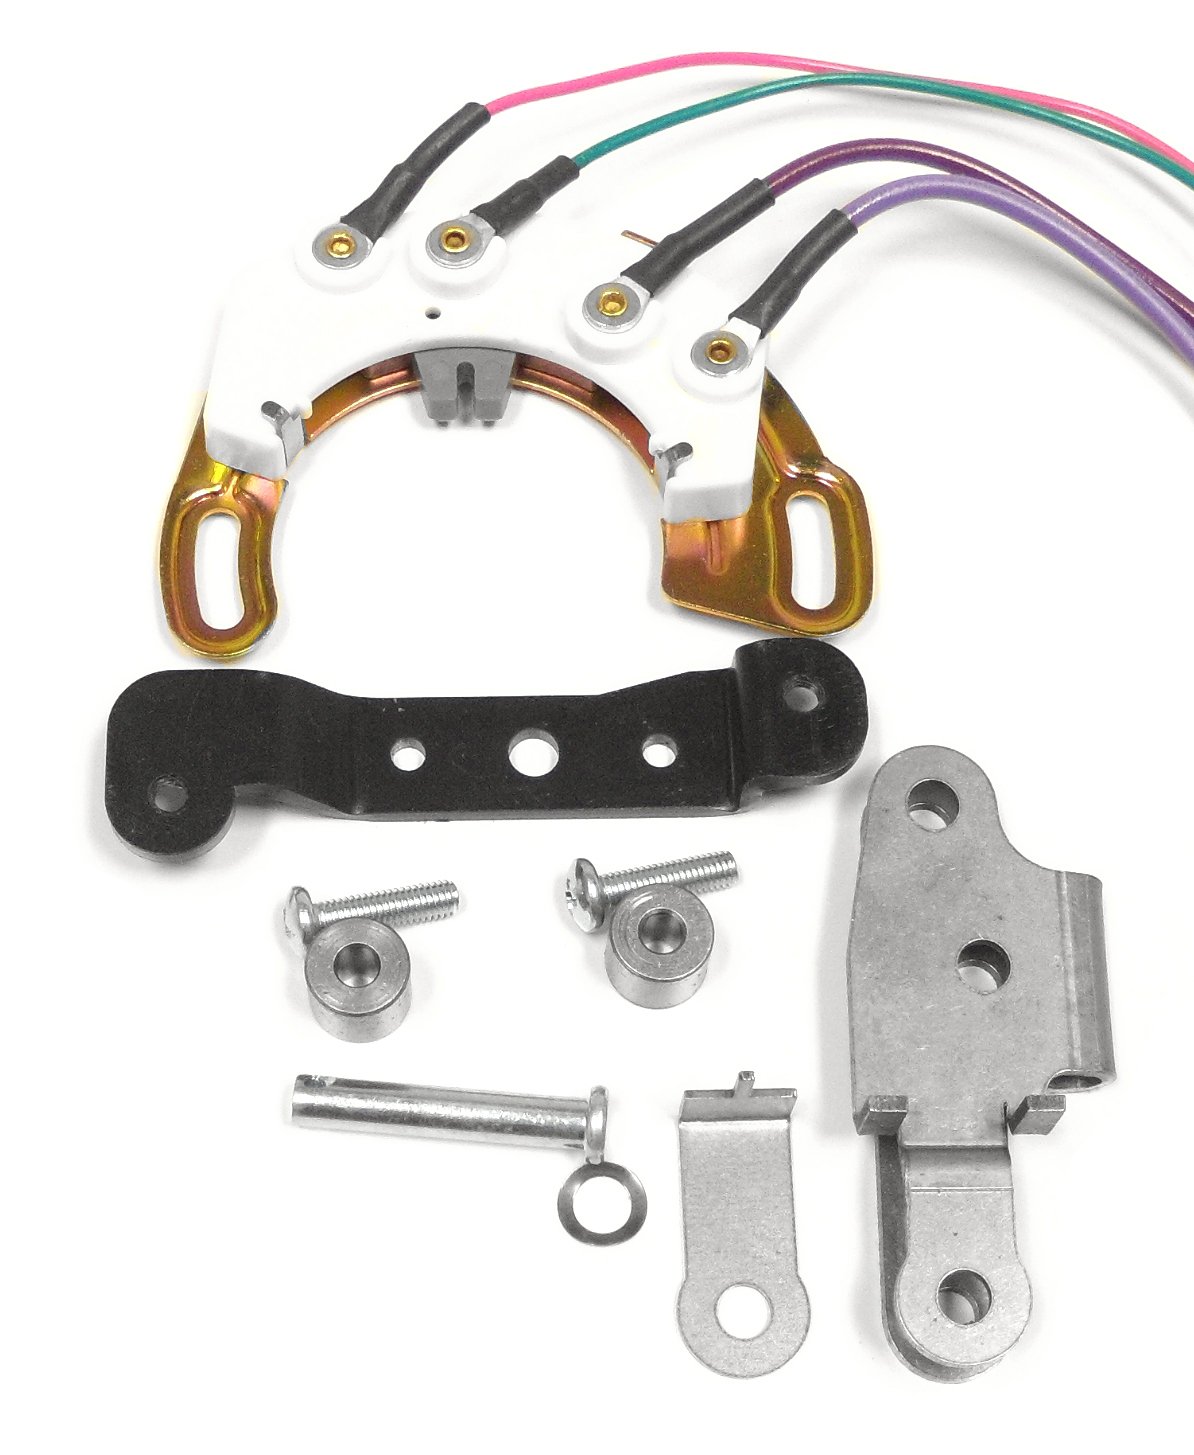 Neutral Safety Switch Relocation Kit 1973-81 Chevy Camaro,